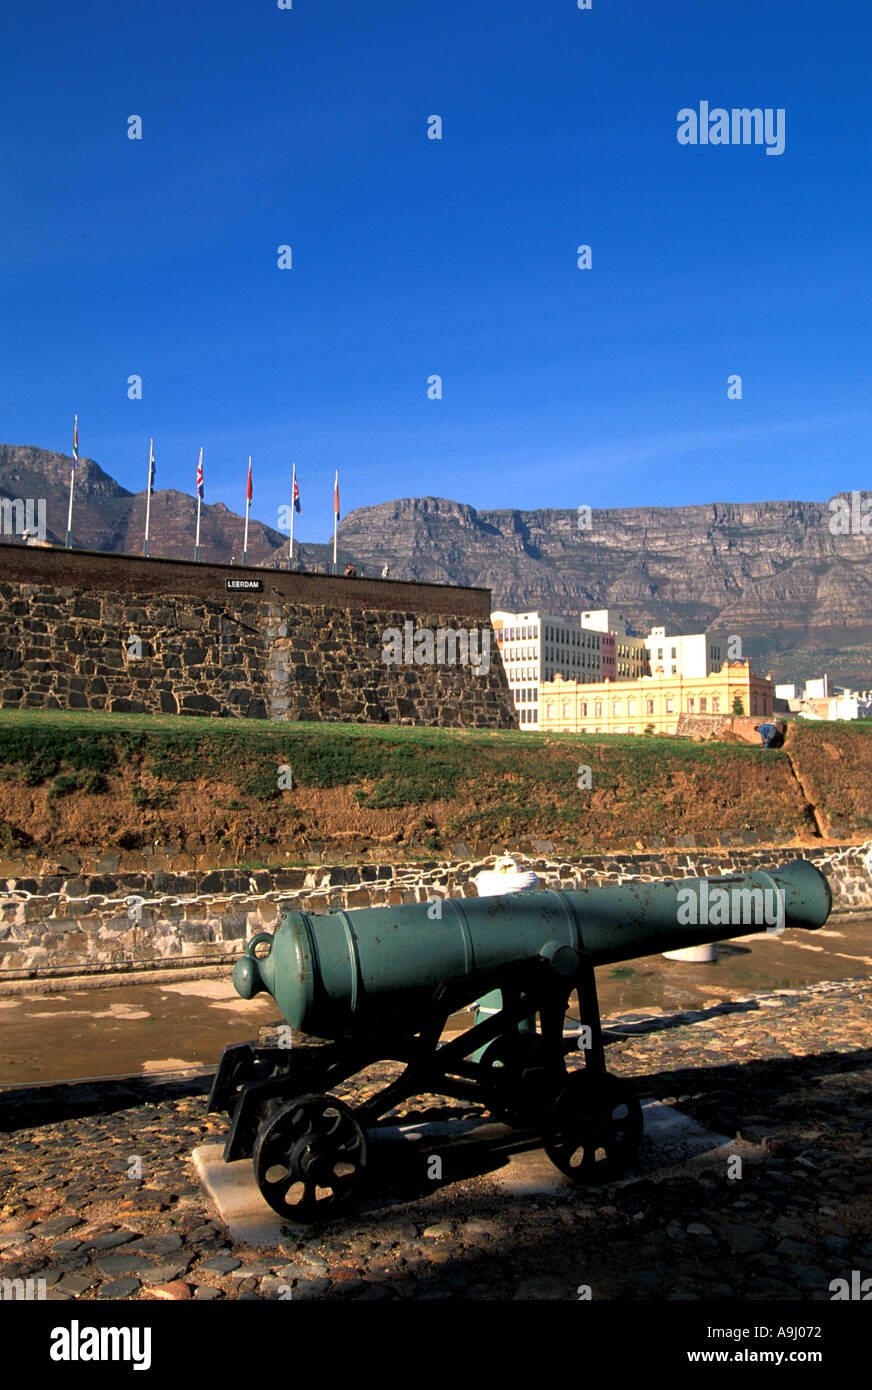 South Africa Cape Town Castle of Good Hope cannon and flags Stock Photo